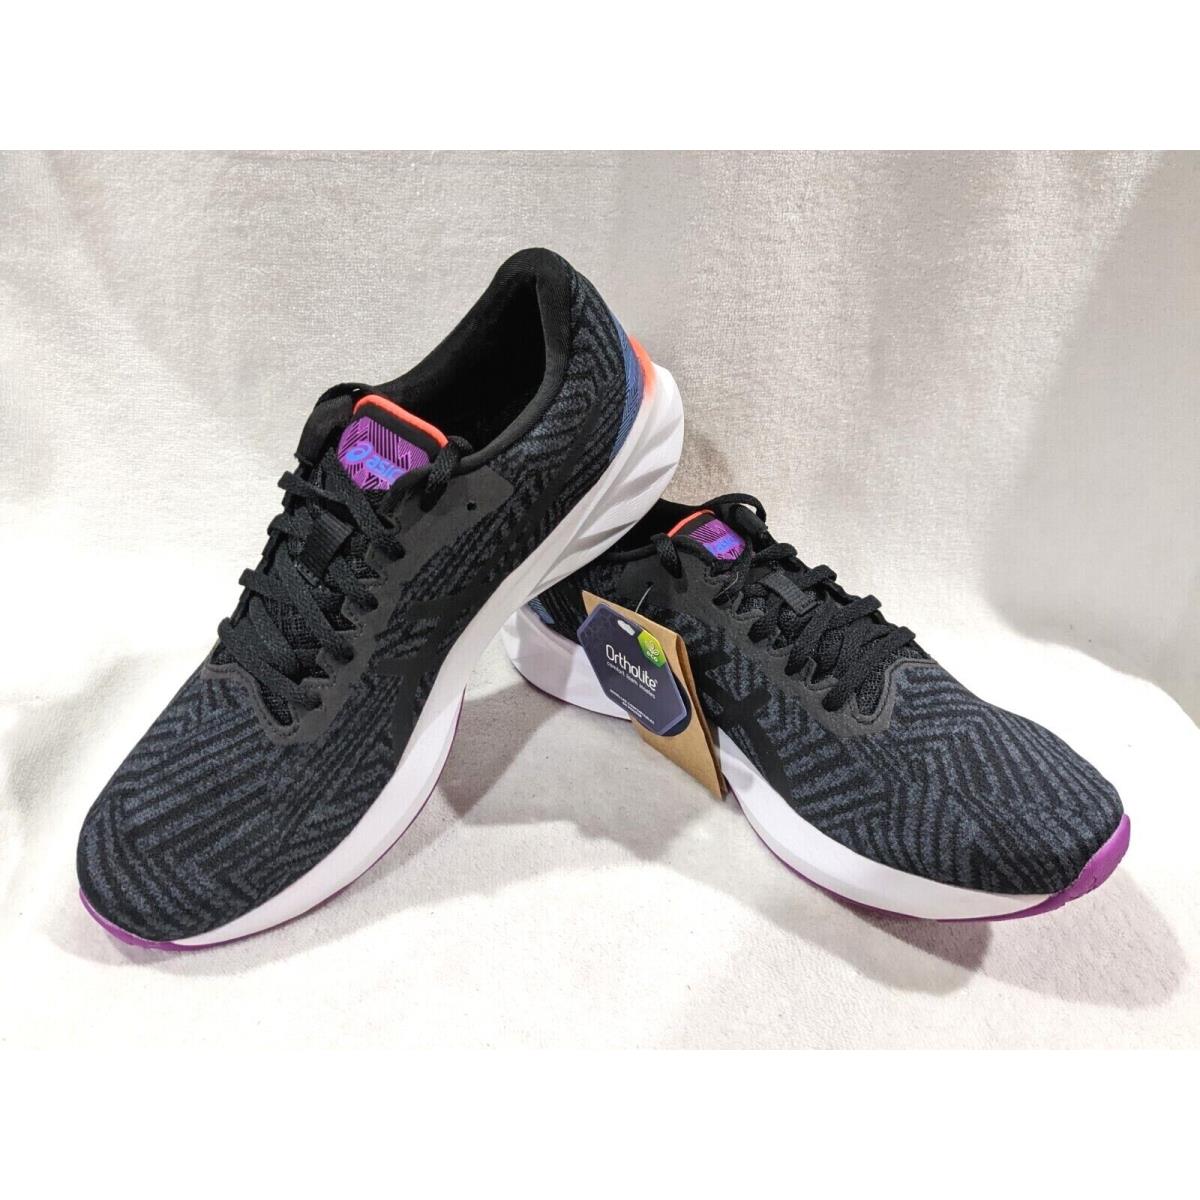 Asics Women`s Roadblast Black/orchid Running Shoes - Size 10 1012A700-002